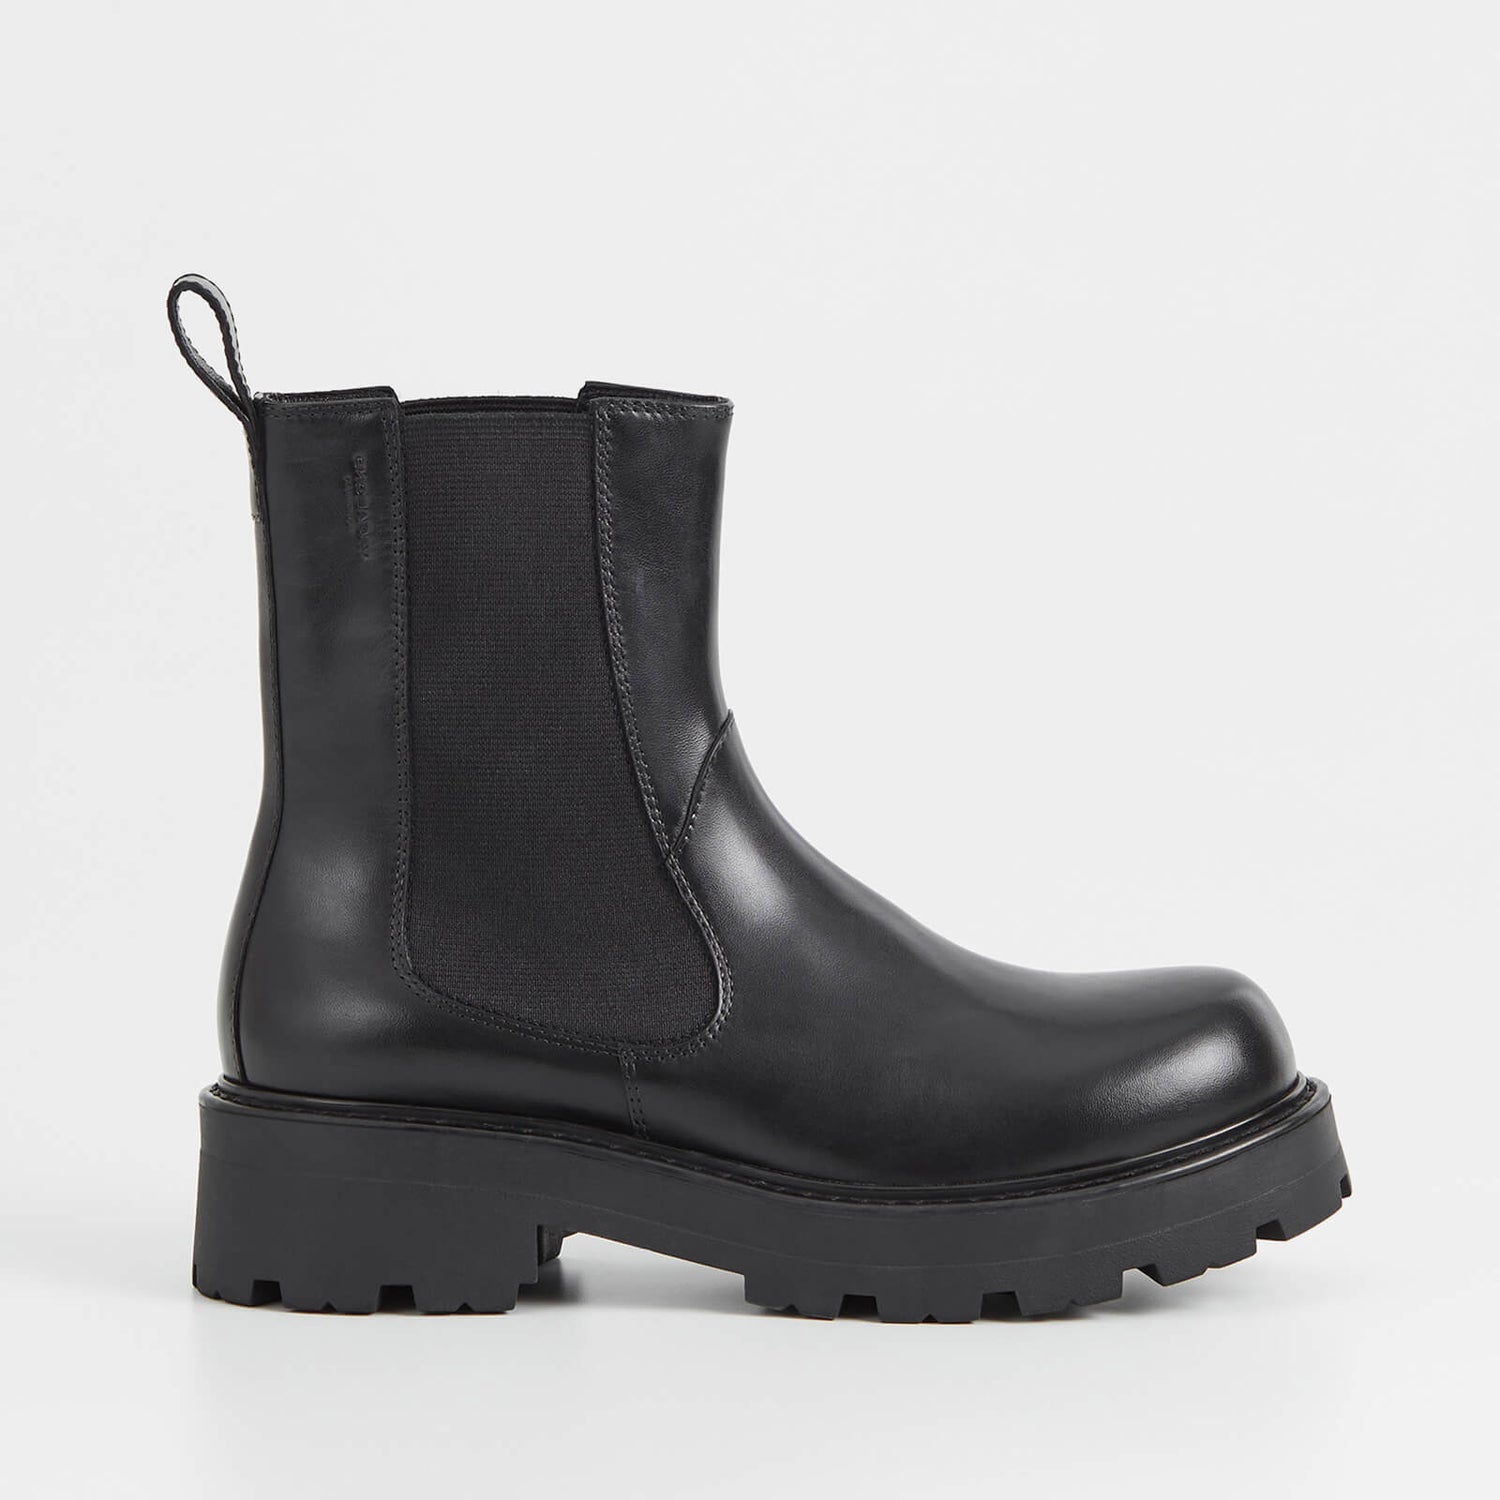 Vagabond Cosmo 2.0 Leather Ankle Chelsea Boots - UK 3